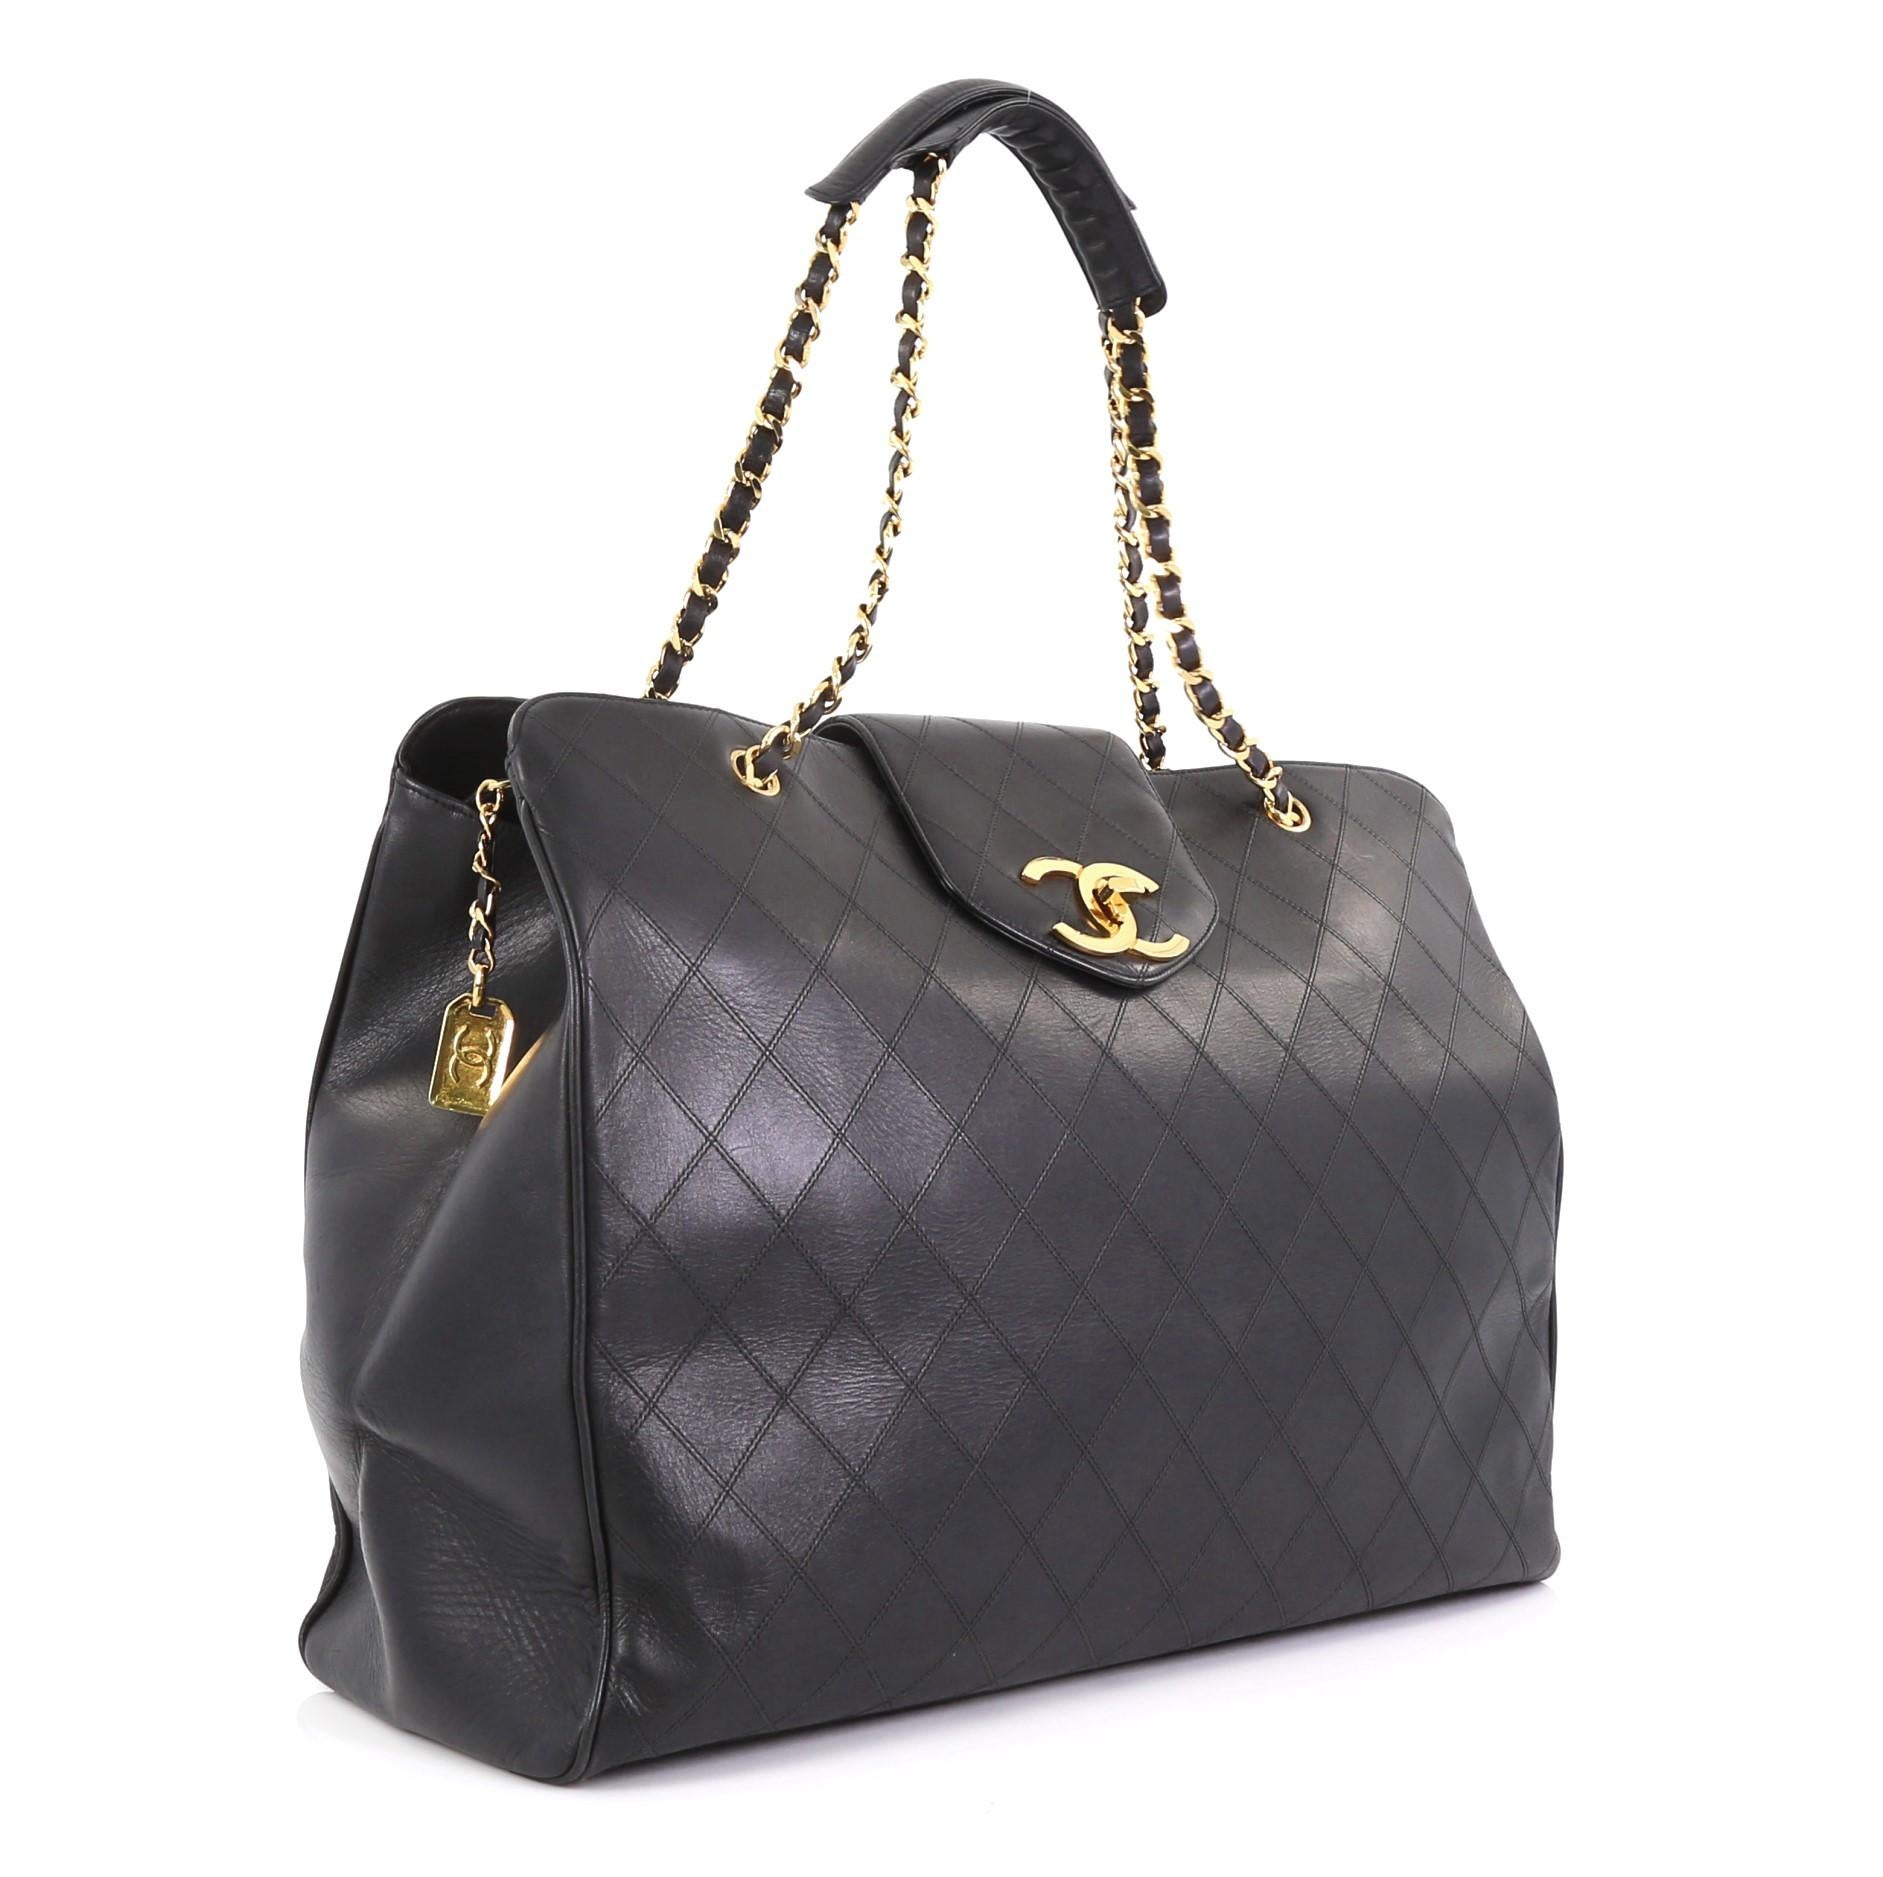 This Chanel Vintage Supermodel Weekender Bag Quilted Leather Large, crafted in black quilted leather, features dual woven-in leather chain straps, flap tab with turn-lock closure, and gold-tone hardware. Its zip closure opens to a black leather